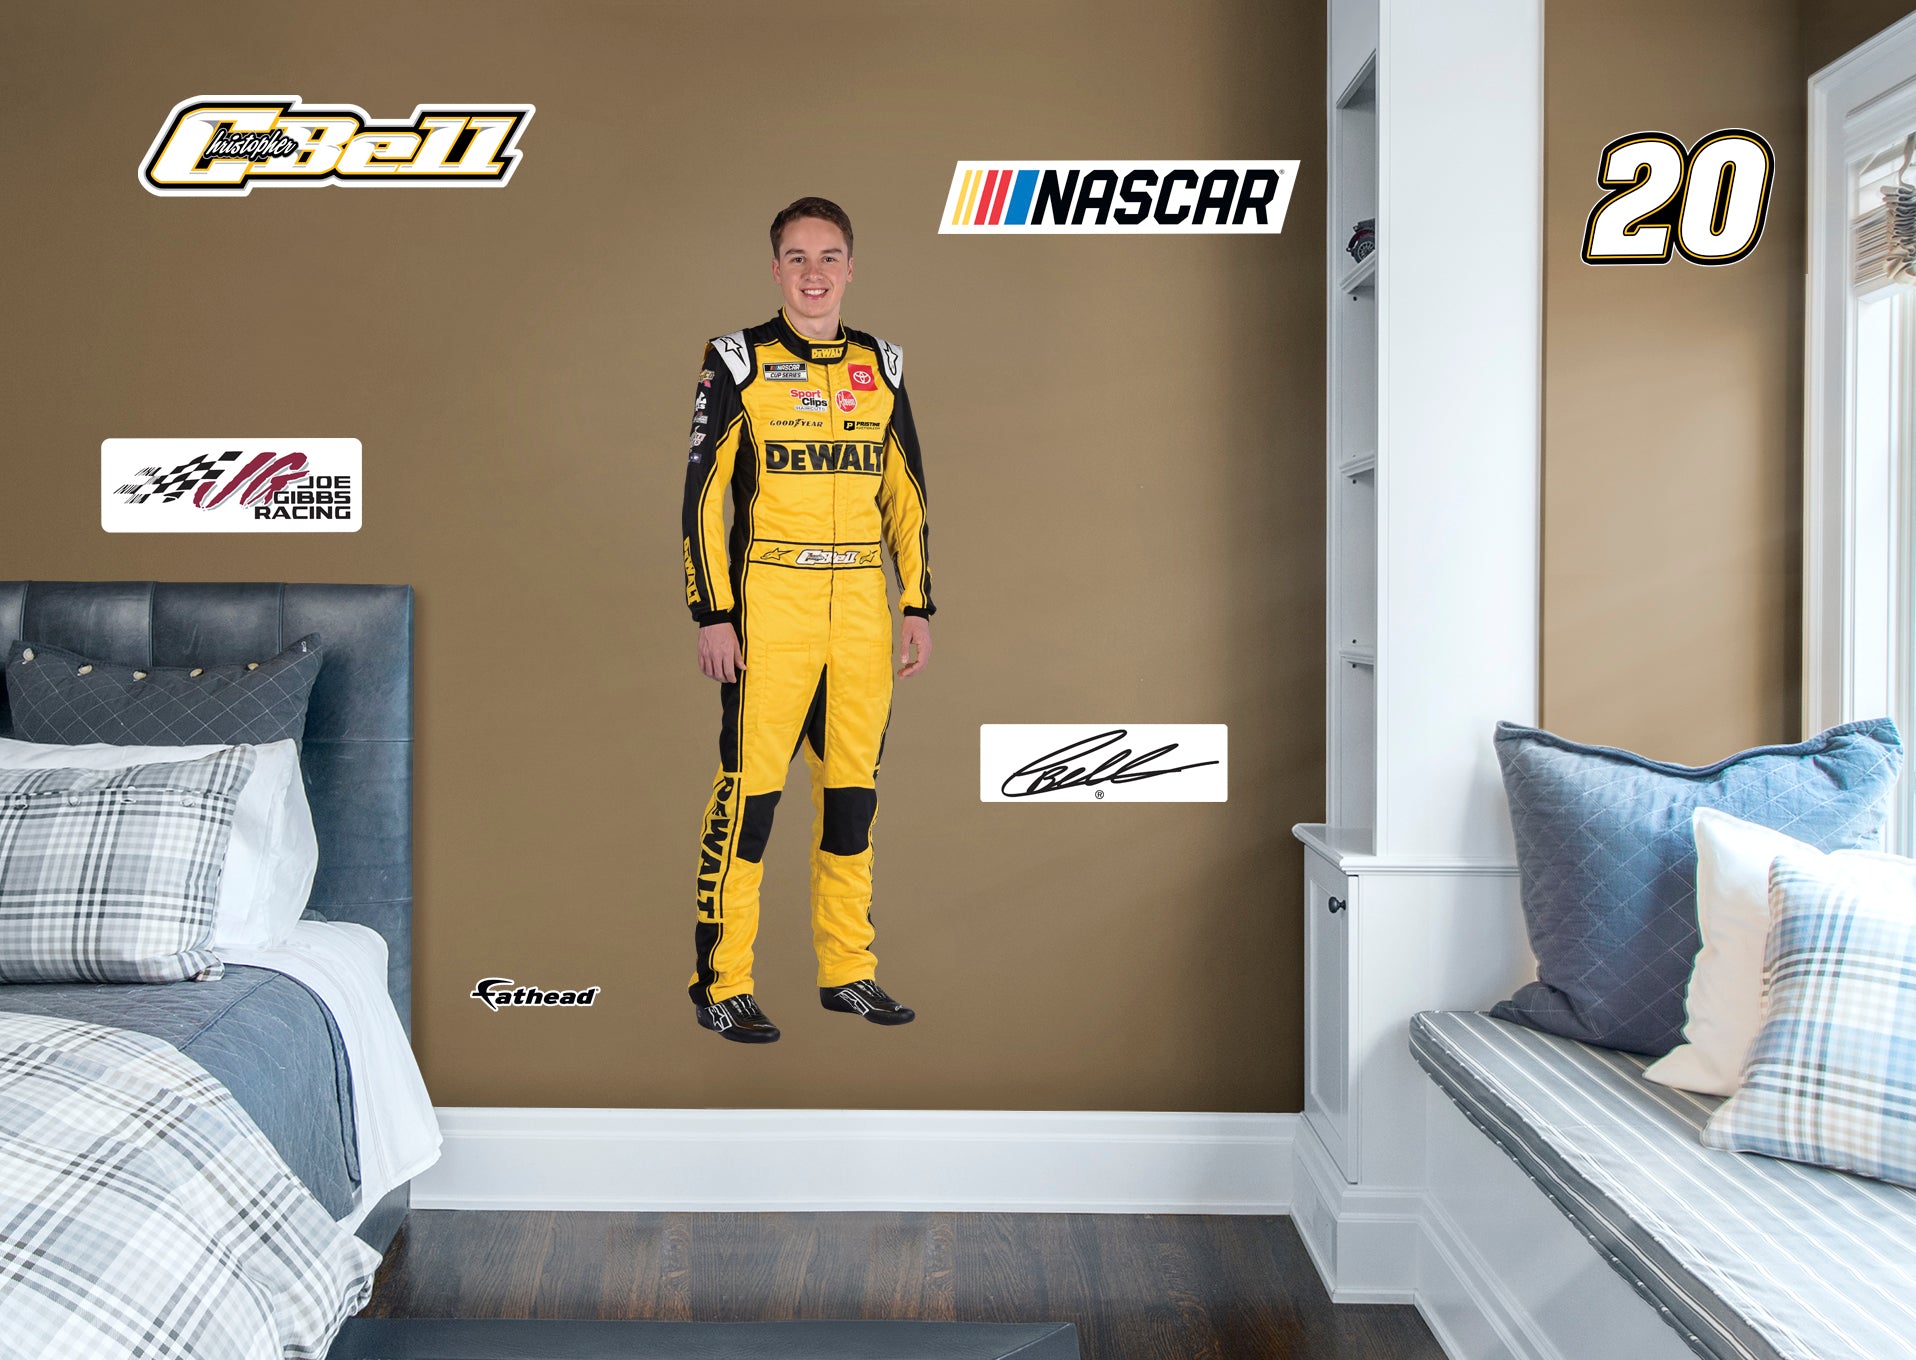 Christopher Bell 2021 Driver - Officially Licensed NASCAR Removable Wall Decal Life-Size Character + 5 Decals (22"W x 72"H) by F